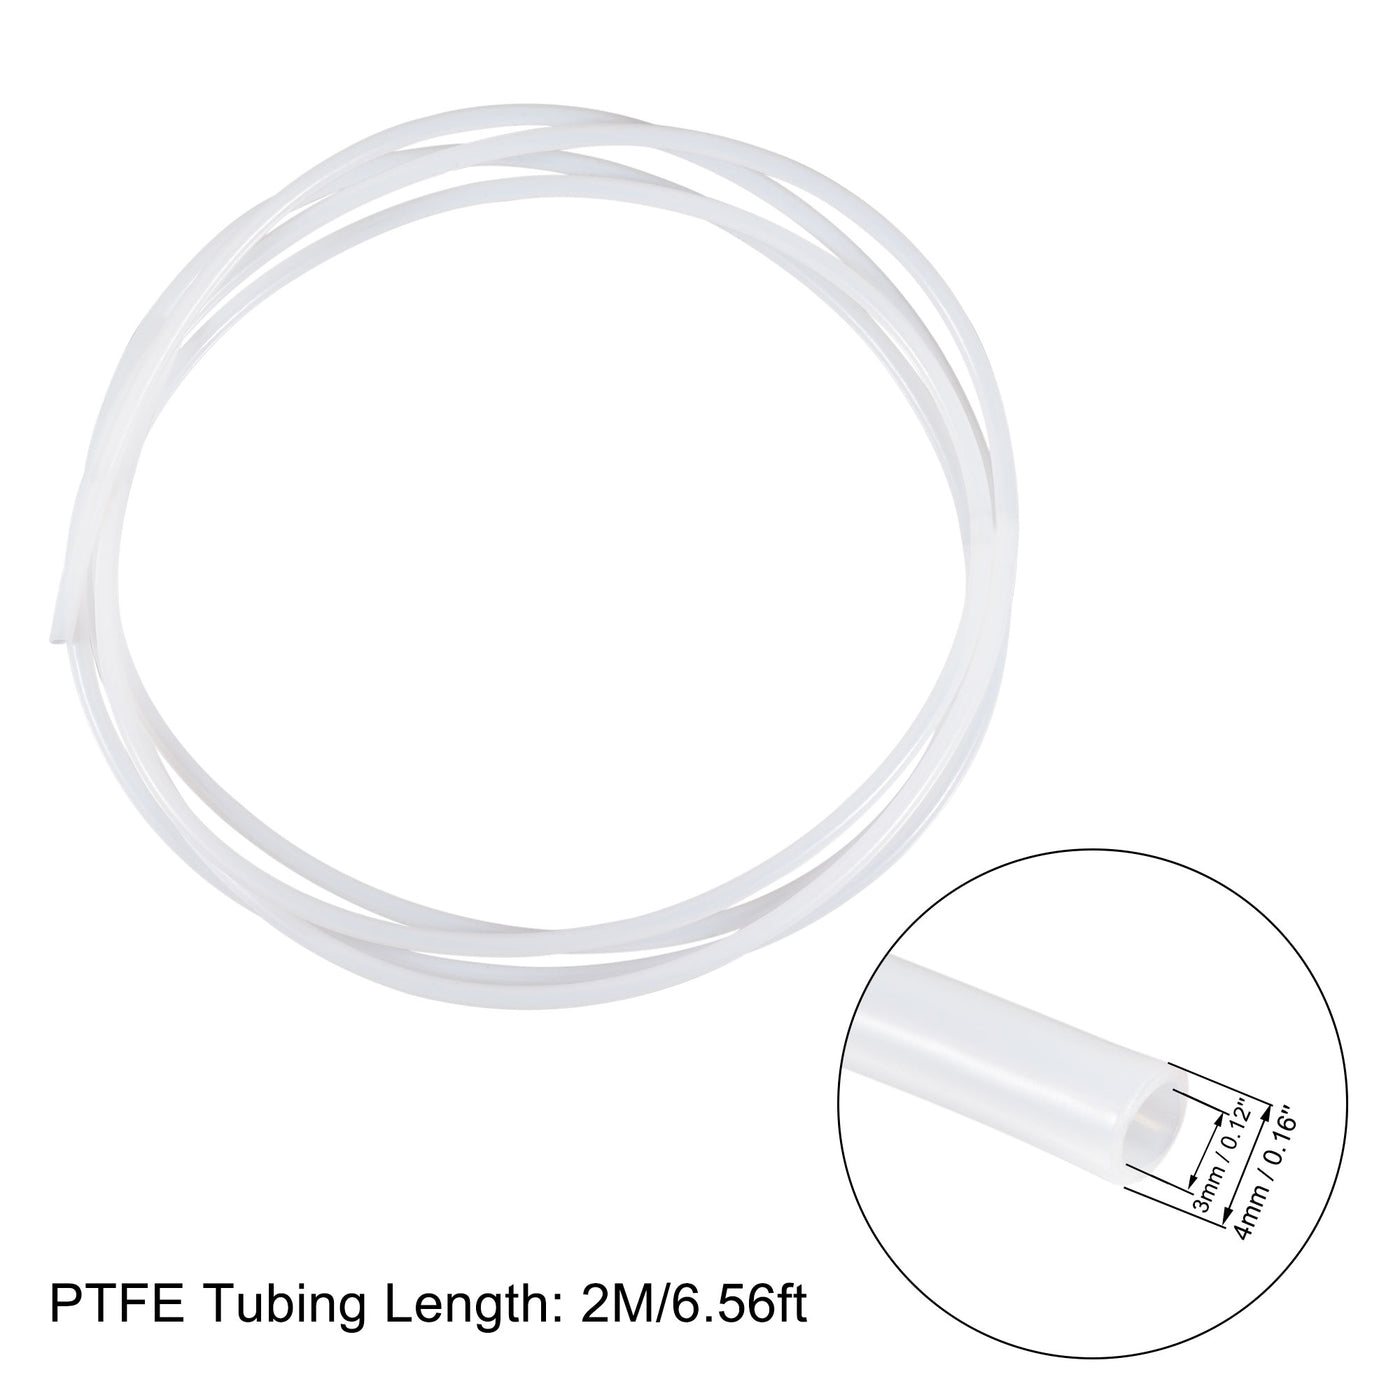 uxcell Uxcell PTFE Tubing Hose High Temperature Multifunctional Pipe White 3mm/0.12''ID x 4mm/0.16''OD x 6.56ft with Tube Cutter